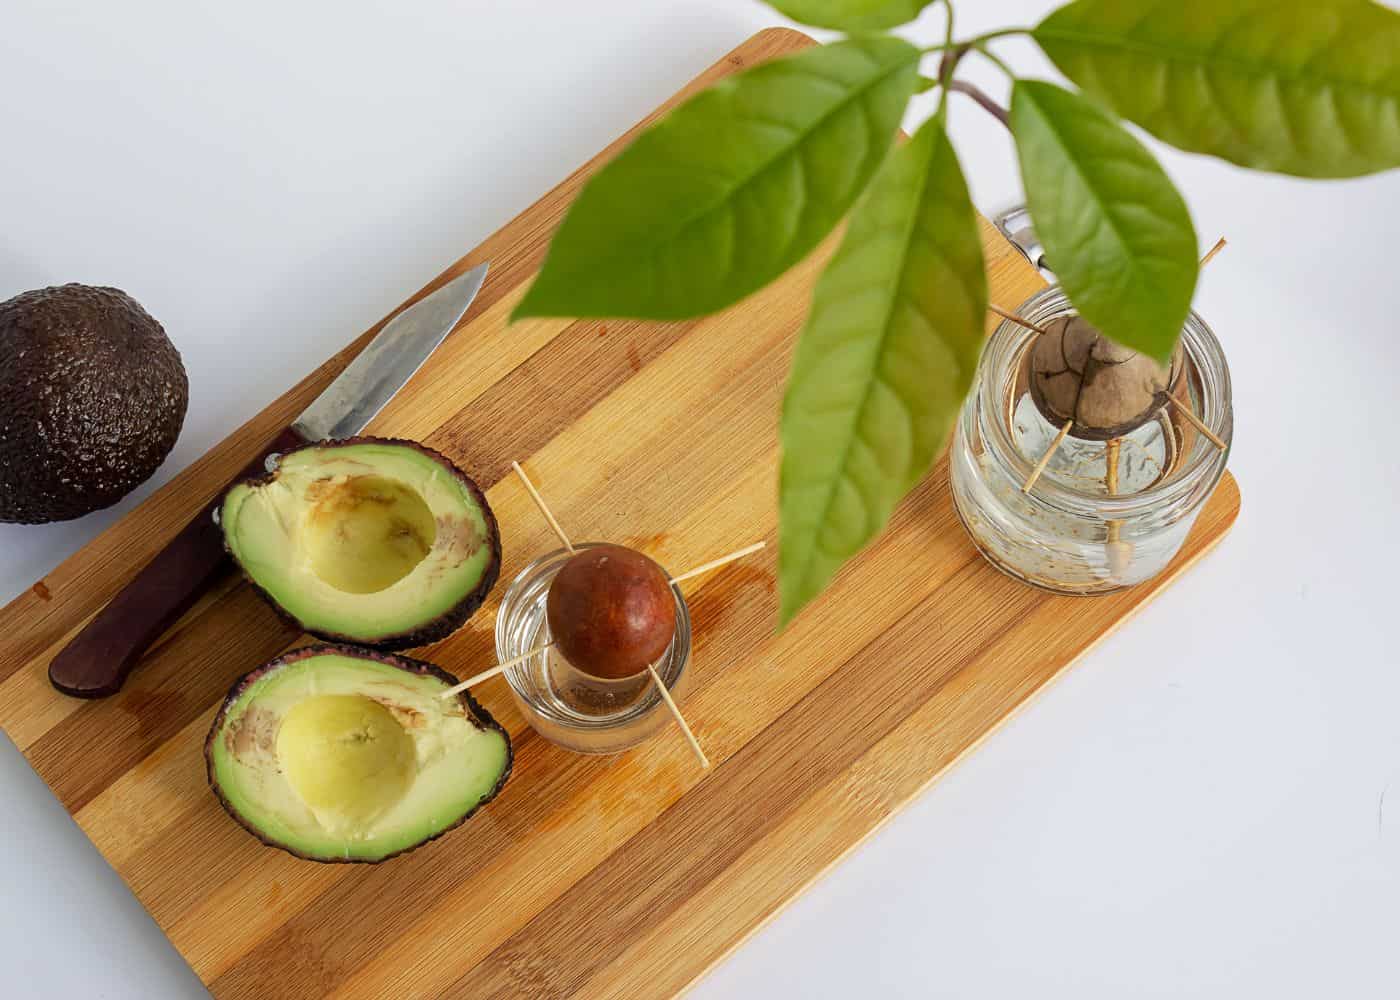 How to grow an avocado tree from seed